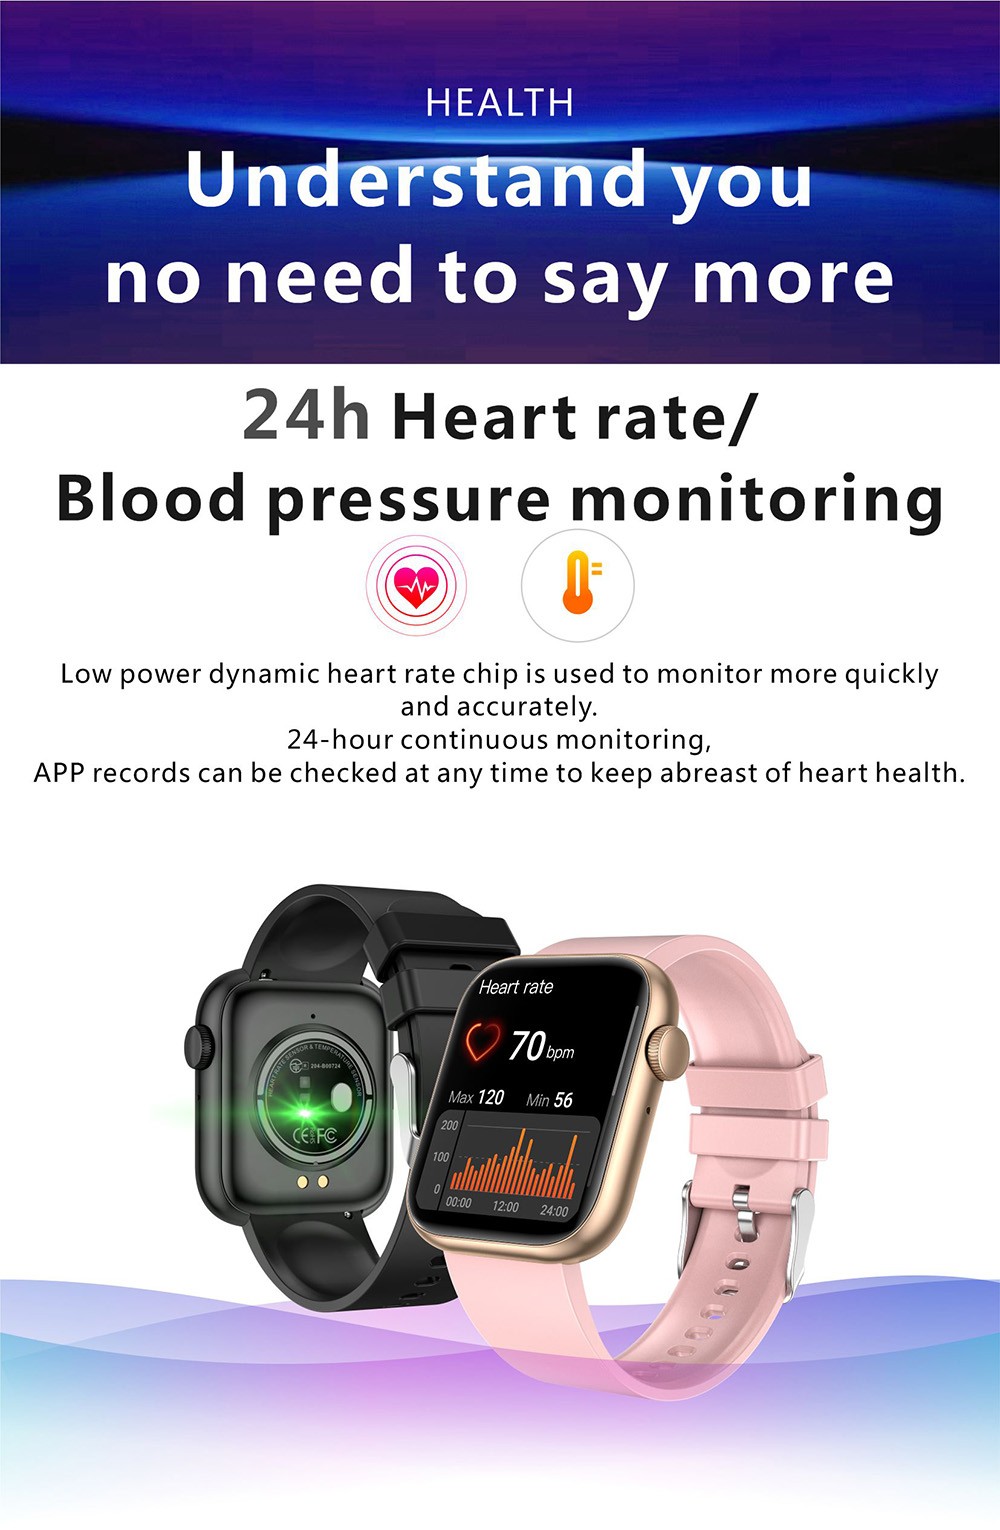 QX7 Smartwatch 1.85'' Large TFT Screen Bluetooth 5.2, Heart Rate Monitor, SpO2, Blood Pressure, 100+ Sports Modes - Pink